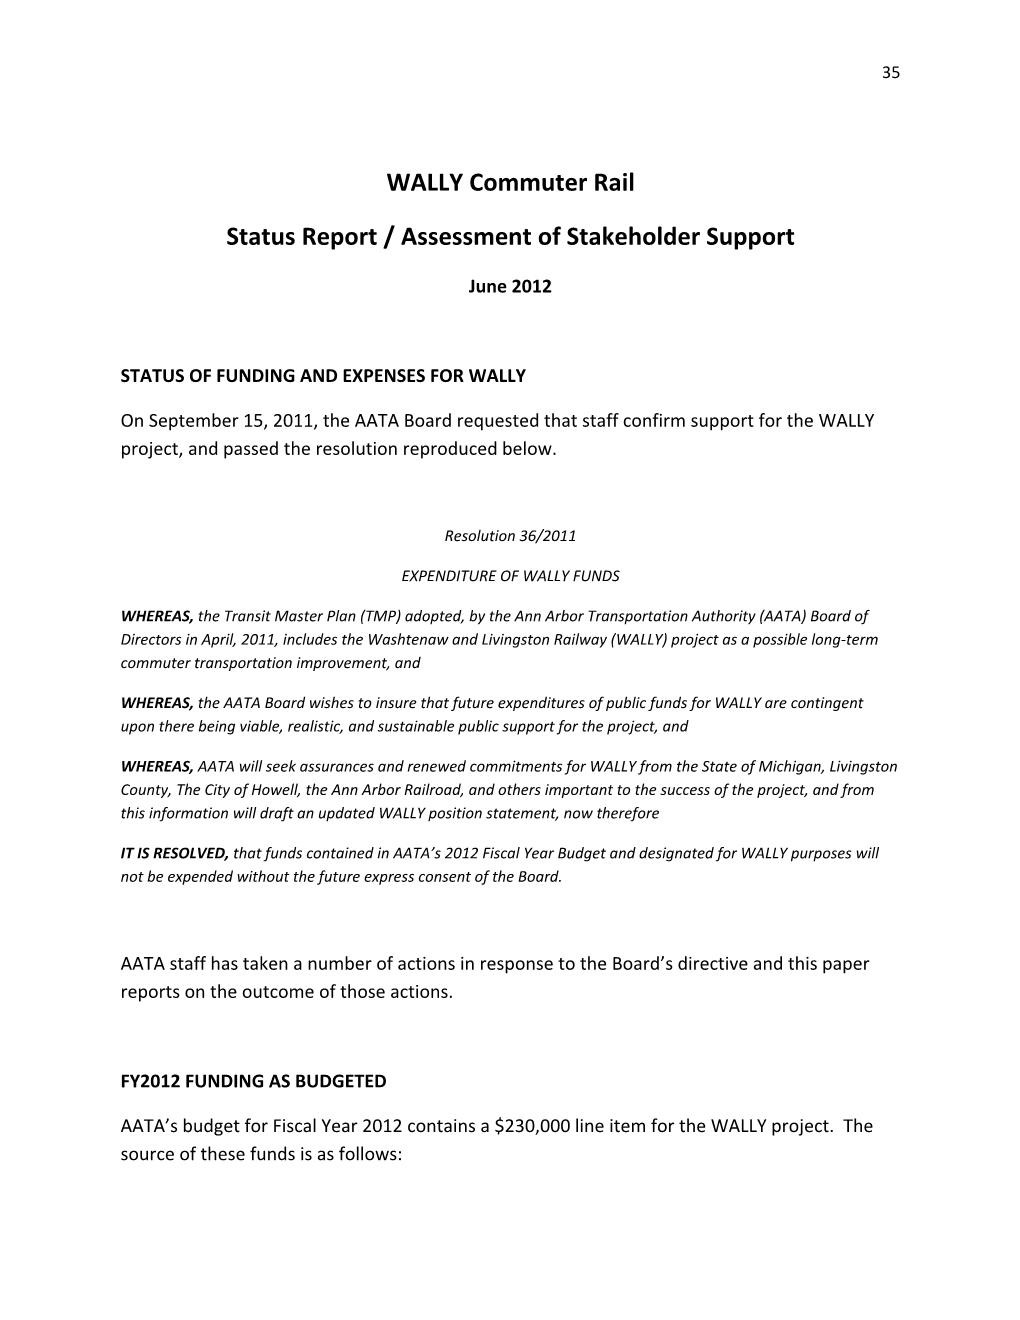 WALLY Commuter Rail Status Report / Assessment of Stakeholder Support